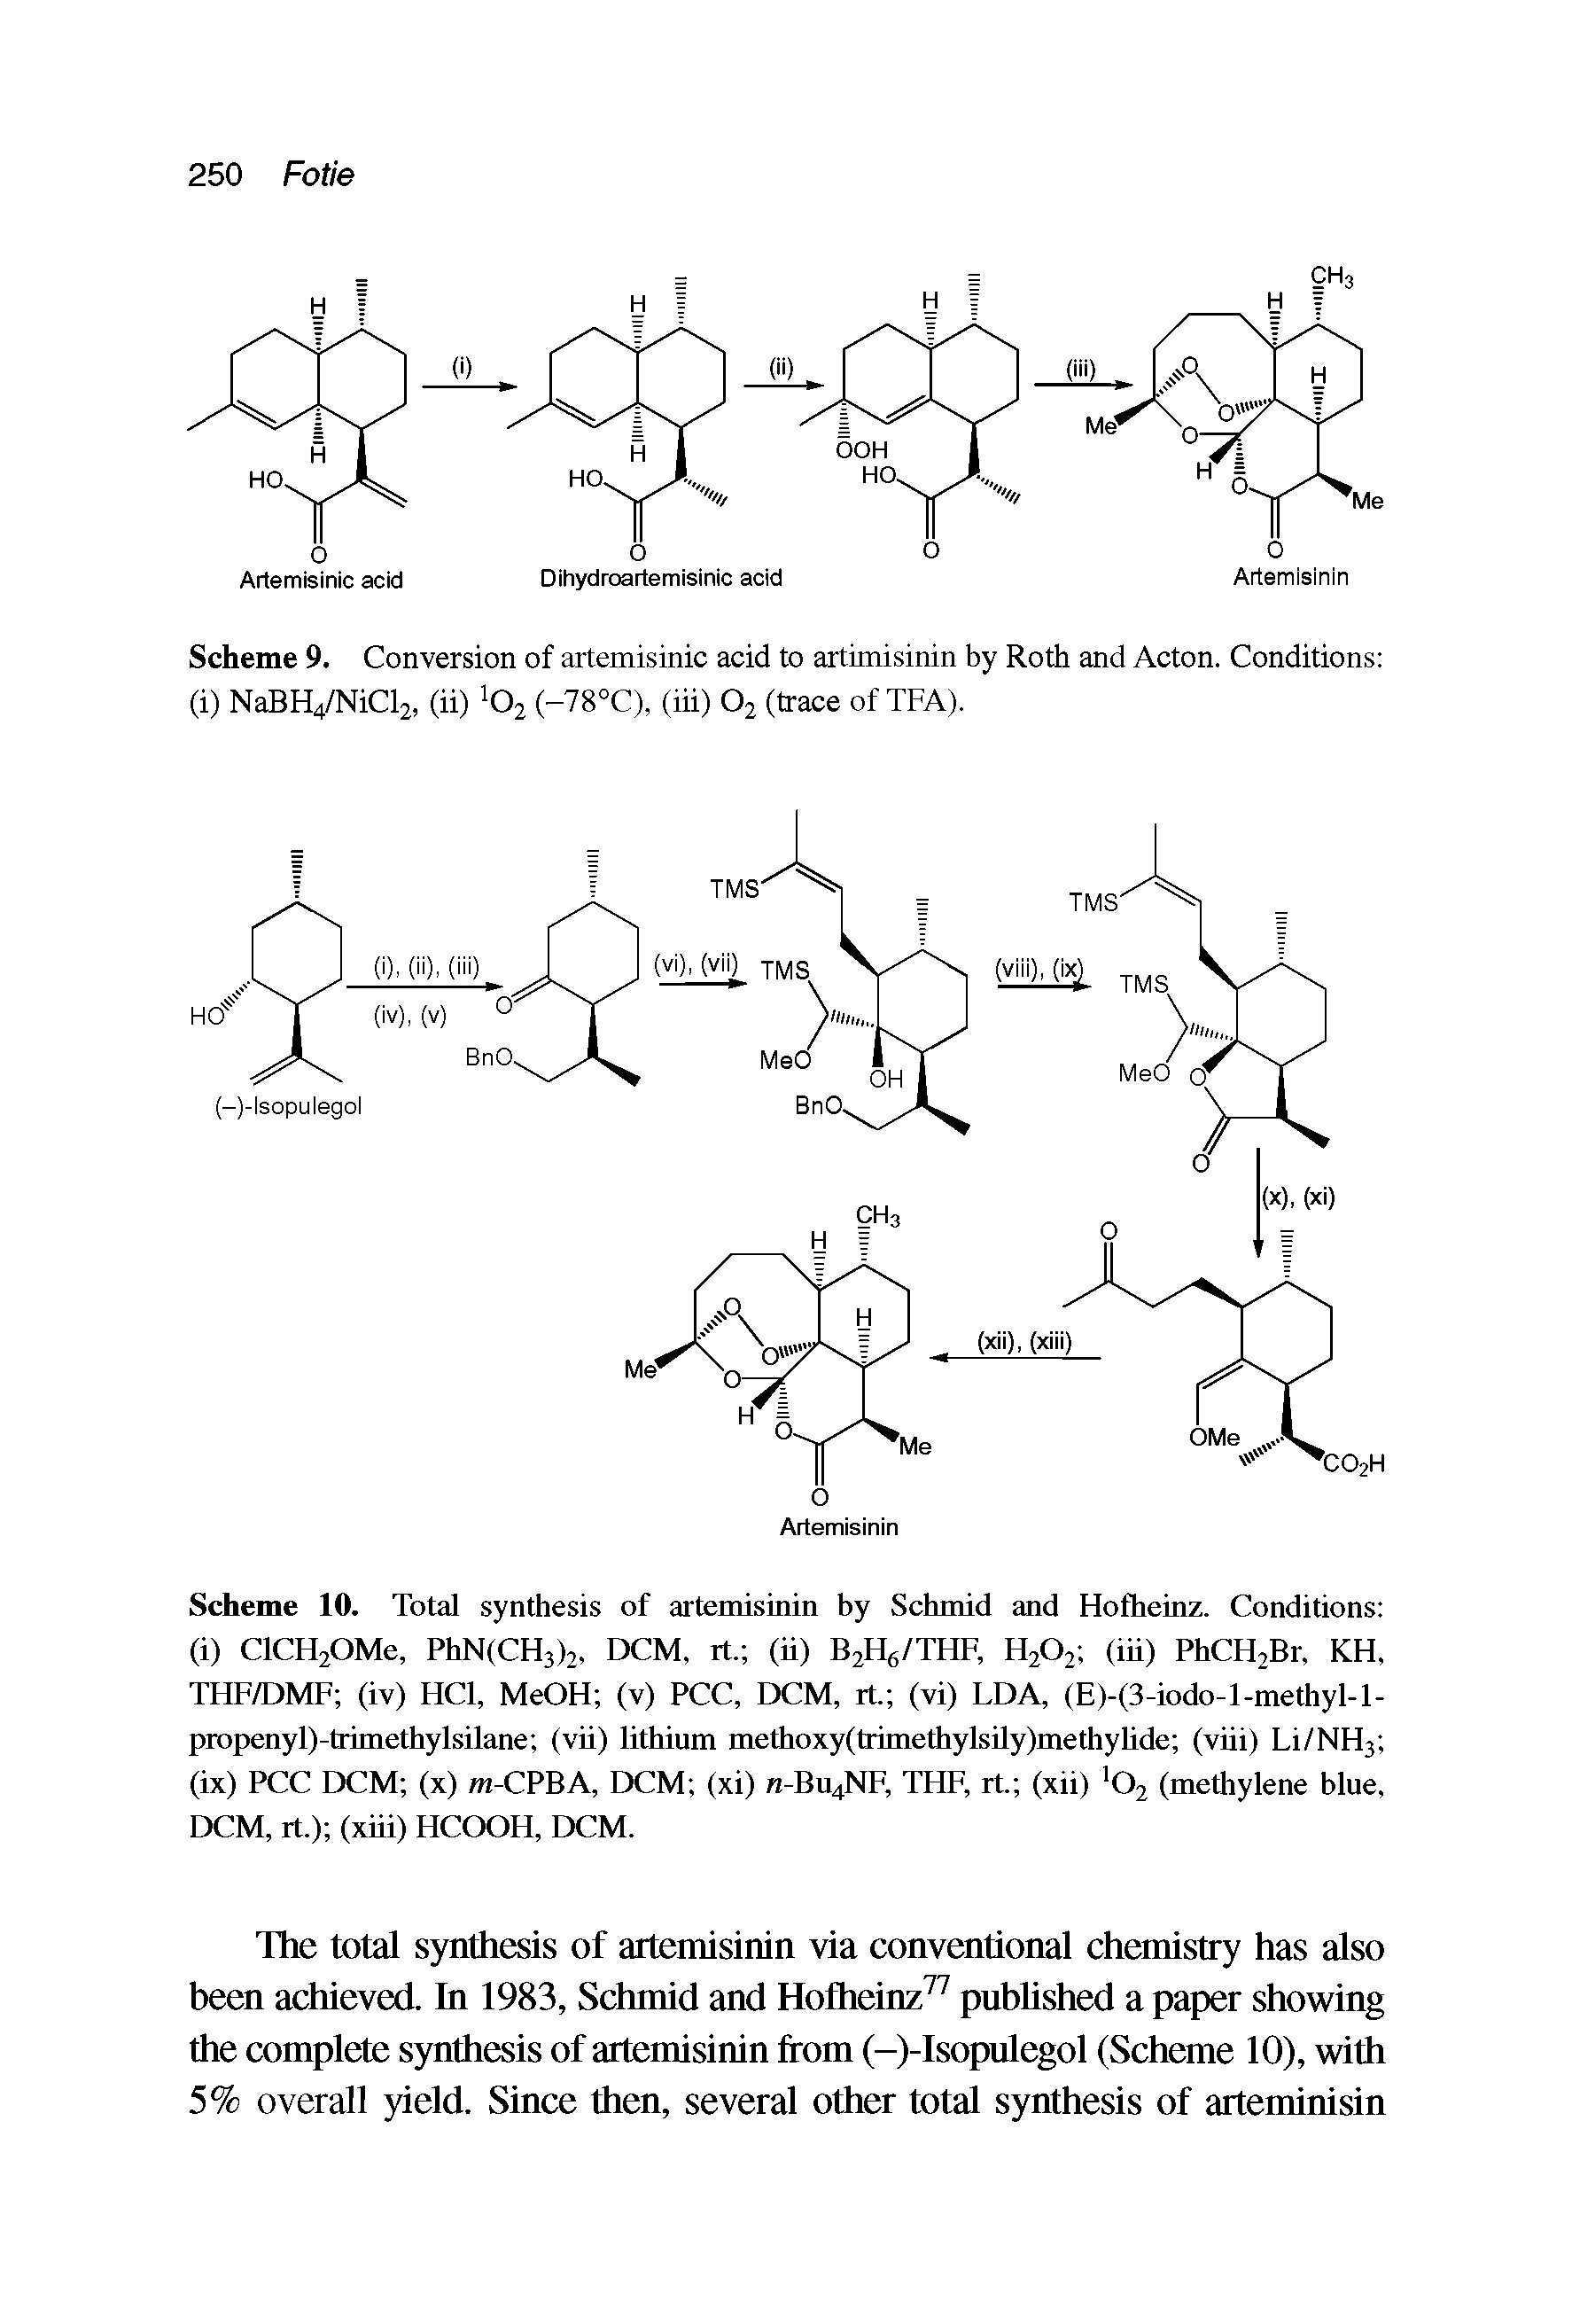 Scheme 9. Conversion of artemisinic acid to artimisinin by Roth and Acton. Conditions (i) NaBH4/NiCl2, (ii) O2 (-78°C), (iii) O2 (trace of TFA).